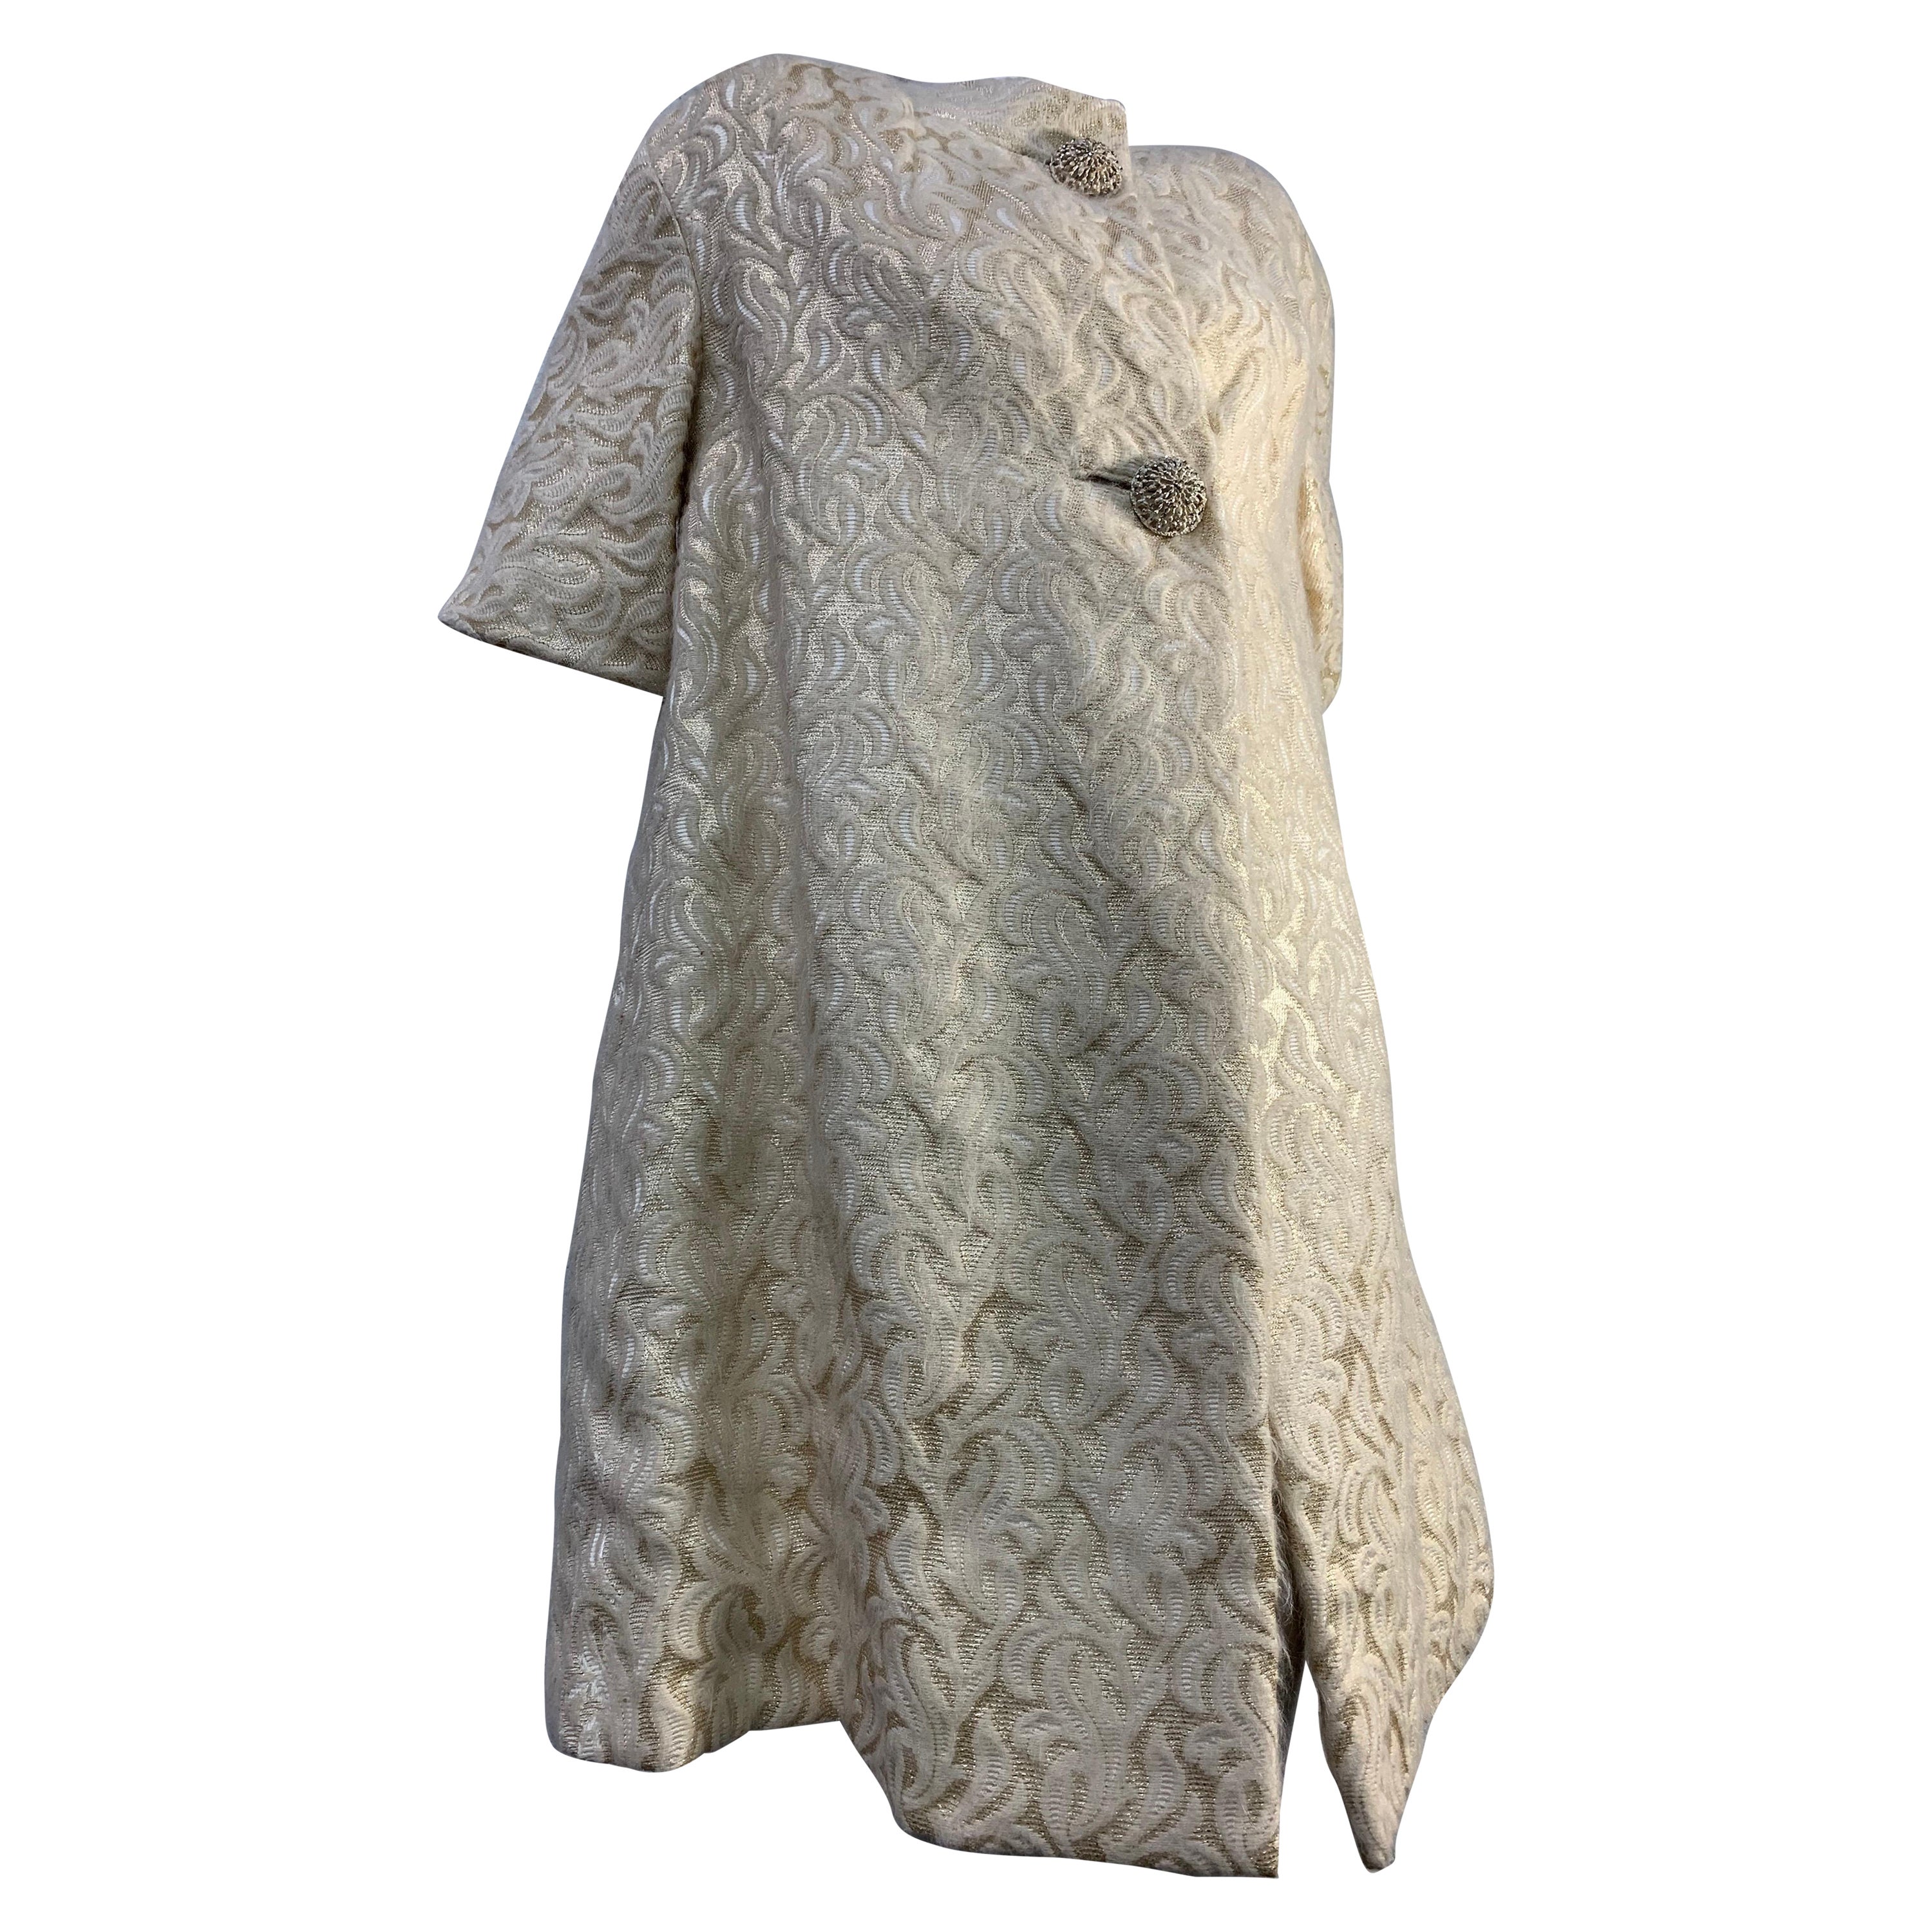 1960s Ira Rentner Gold Lame & Mohair Brocade Spring Coat w/ Filigree Buttons For Sale